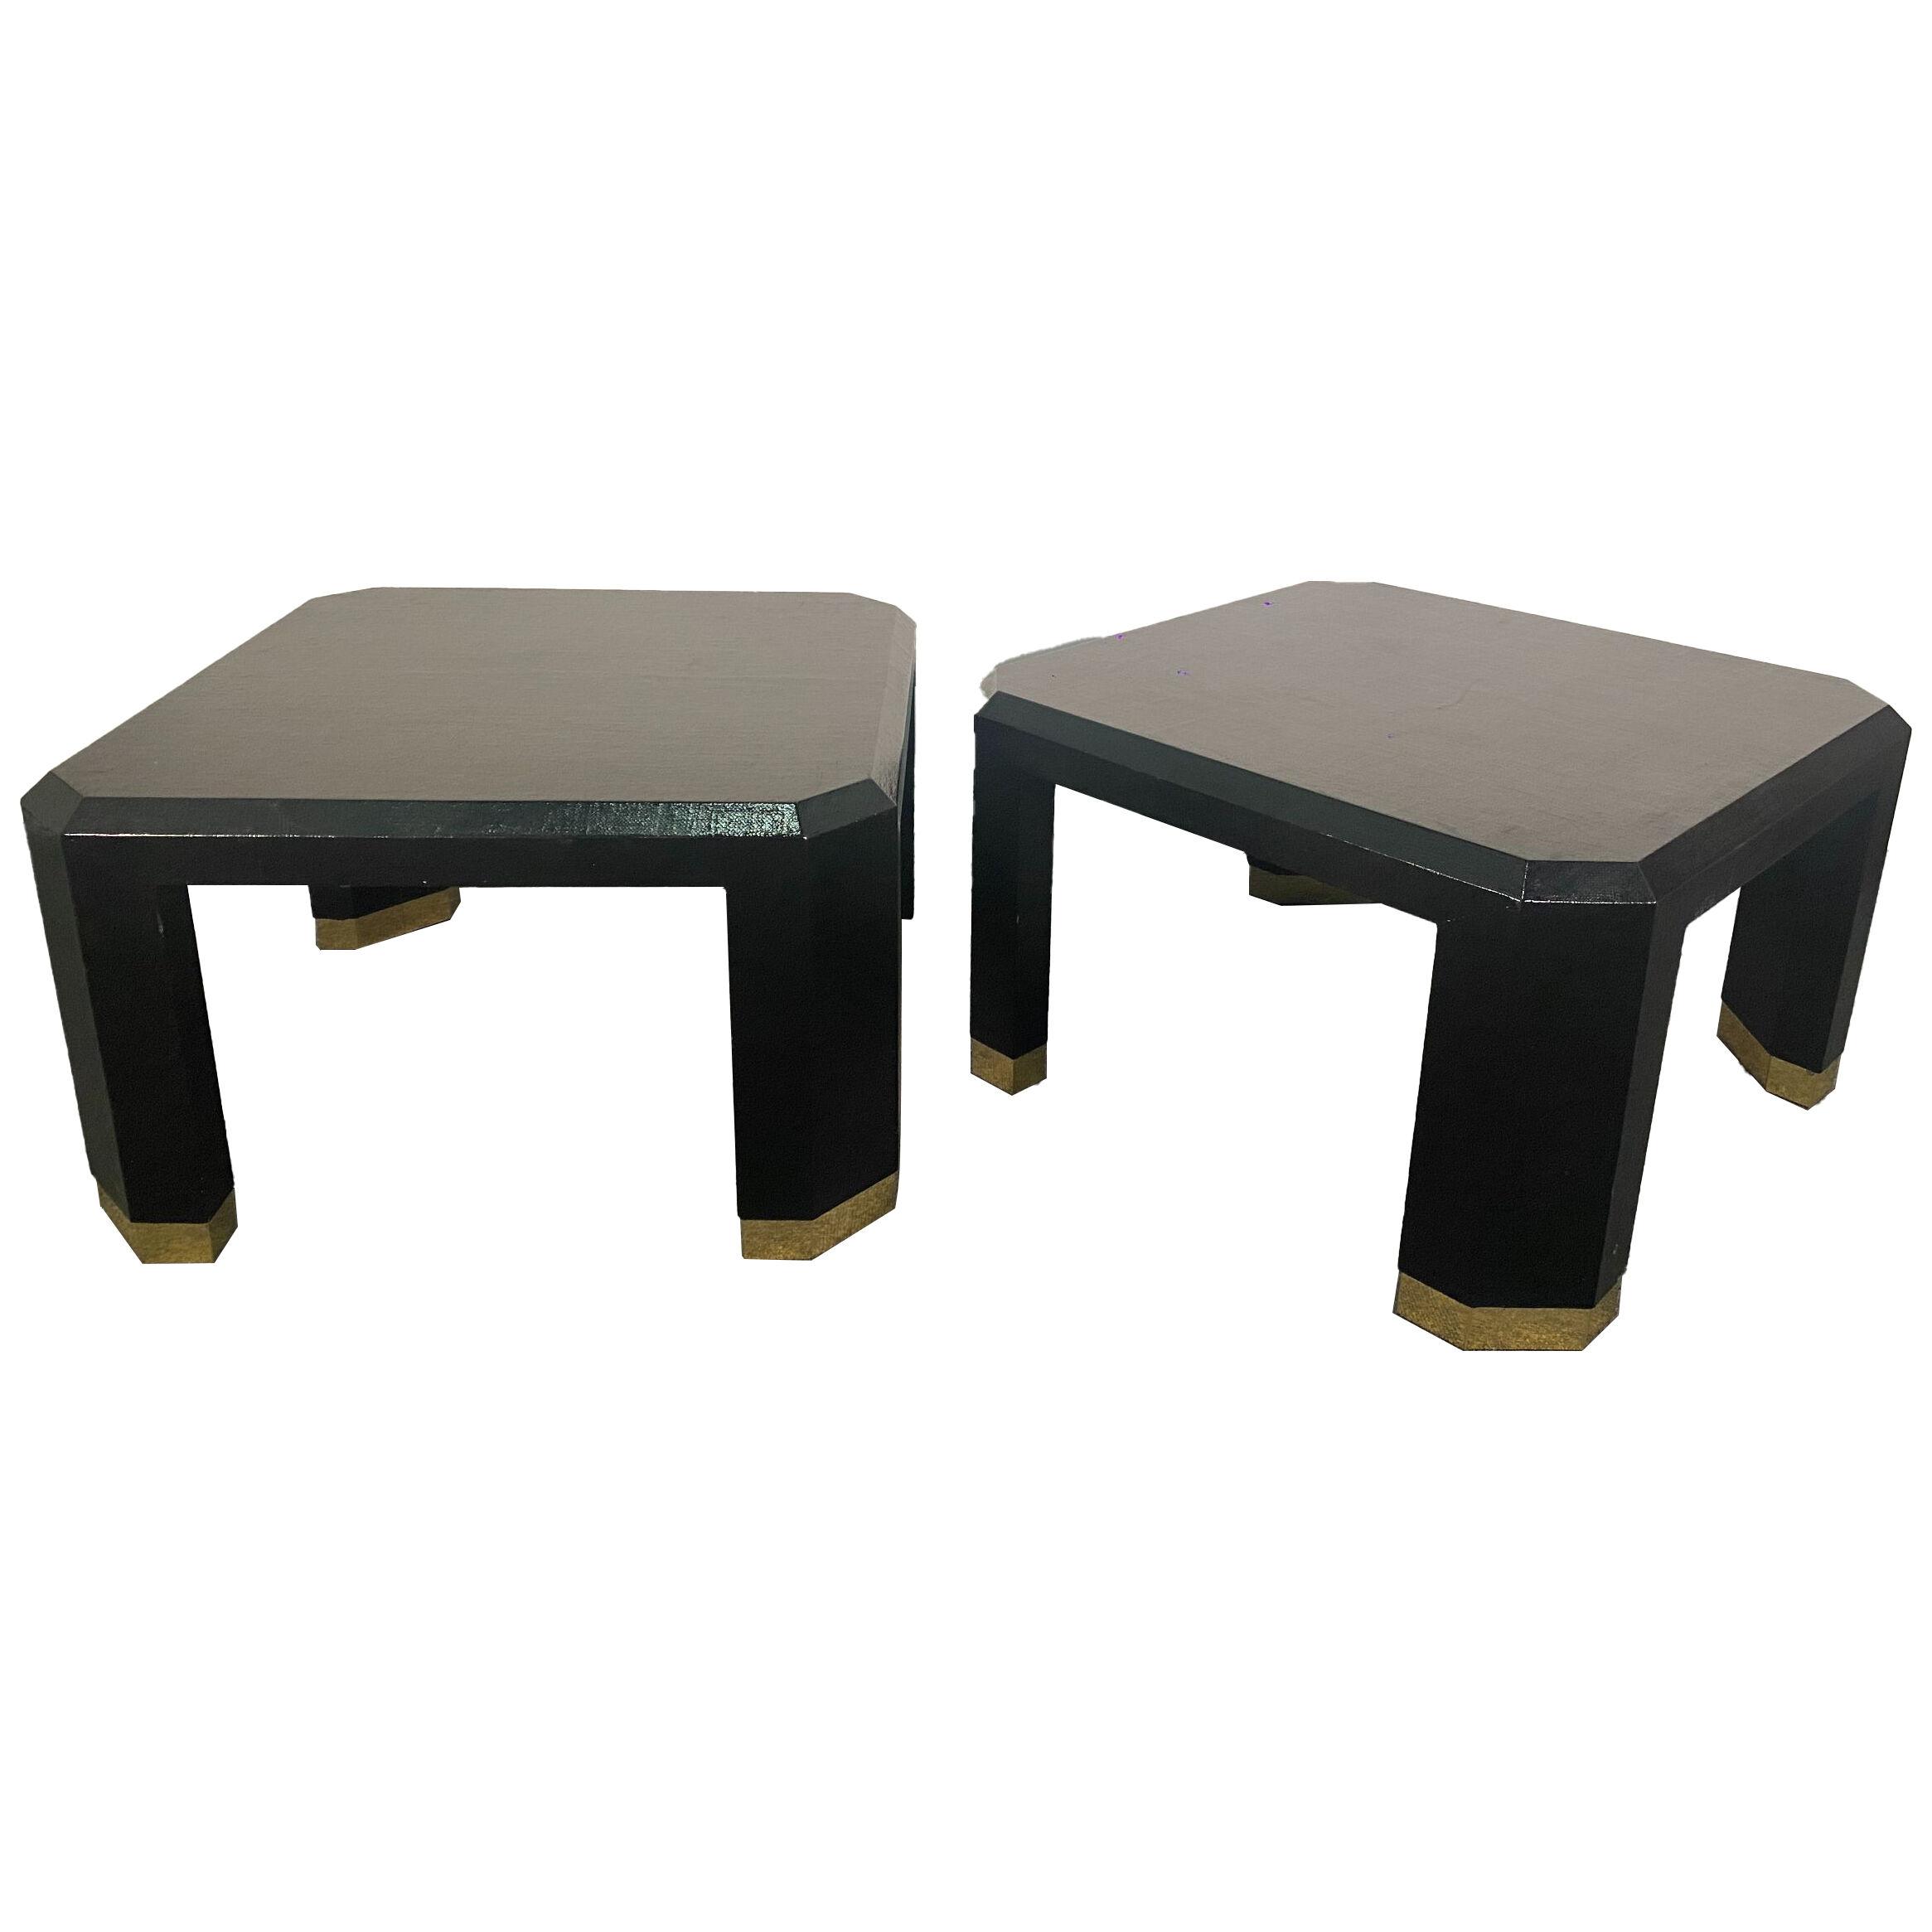 Pair of American Modern Black Lacquer Linen Brass Occasional/Low Tables,Ron Seff